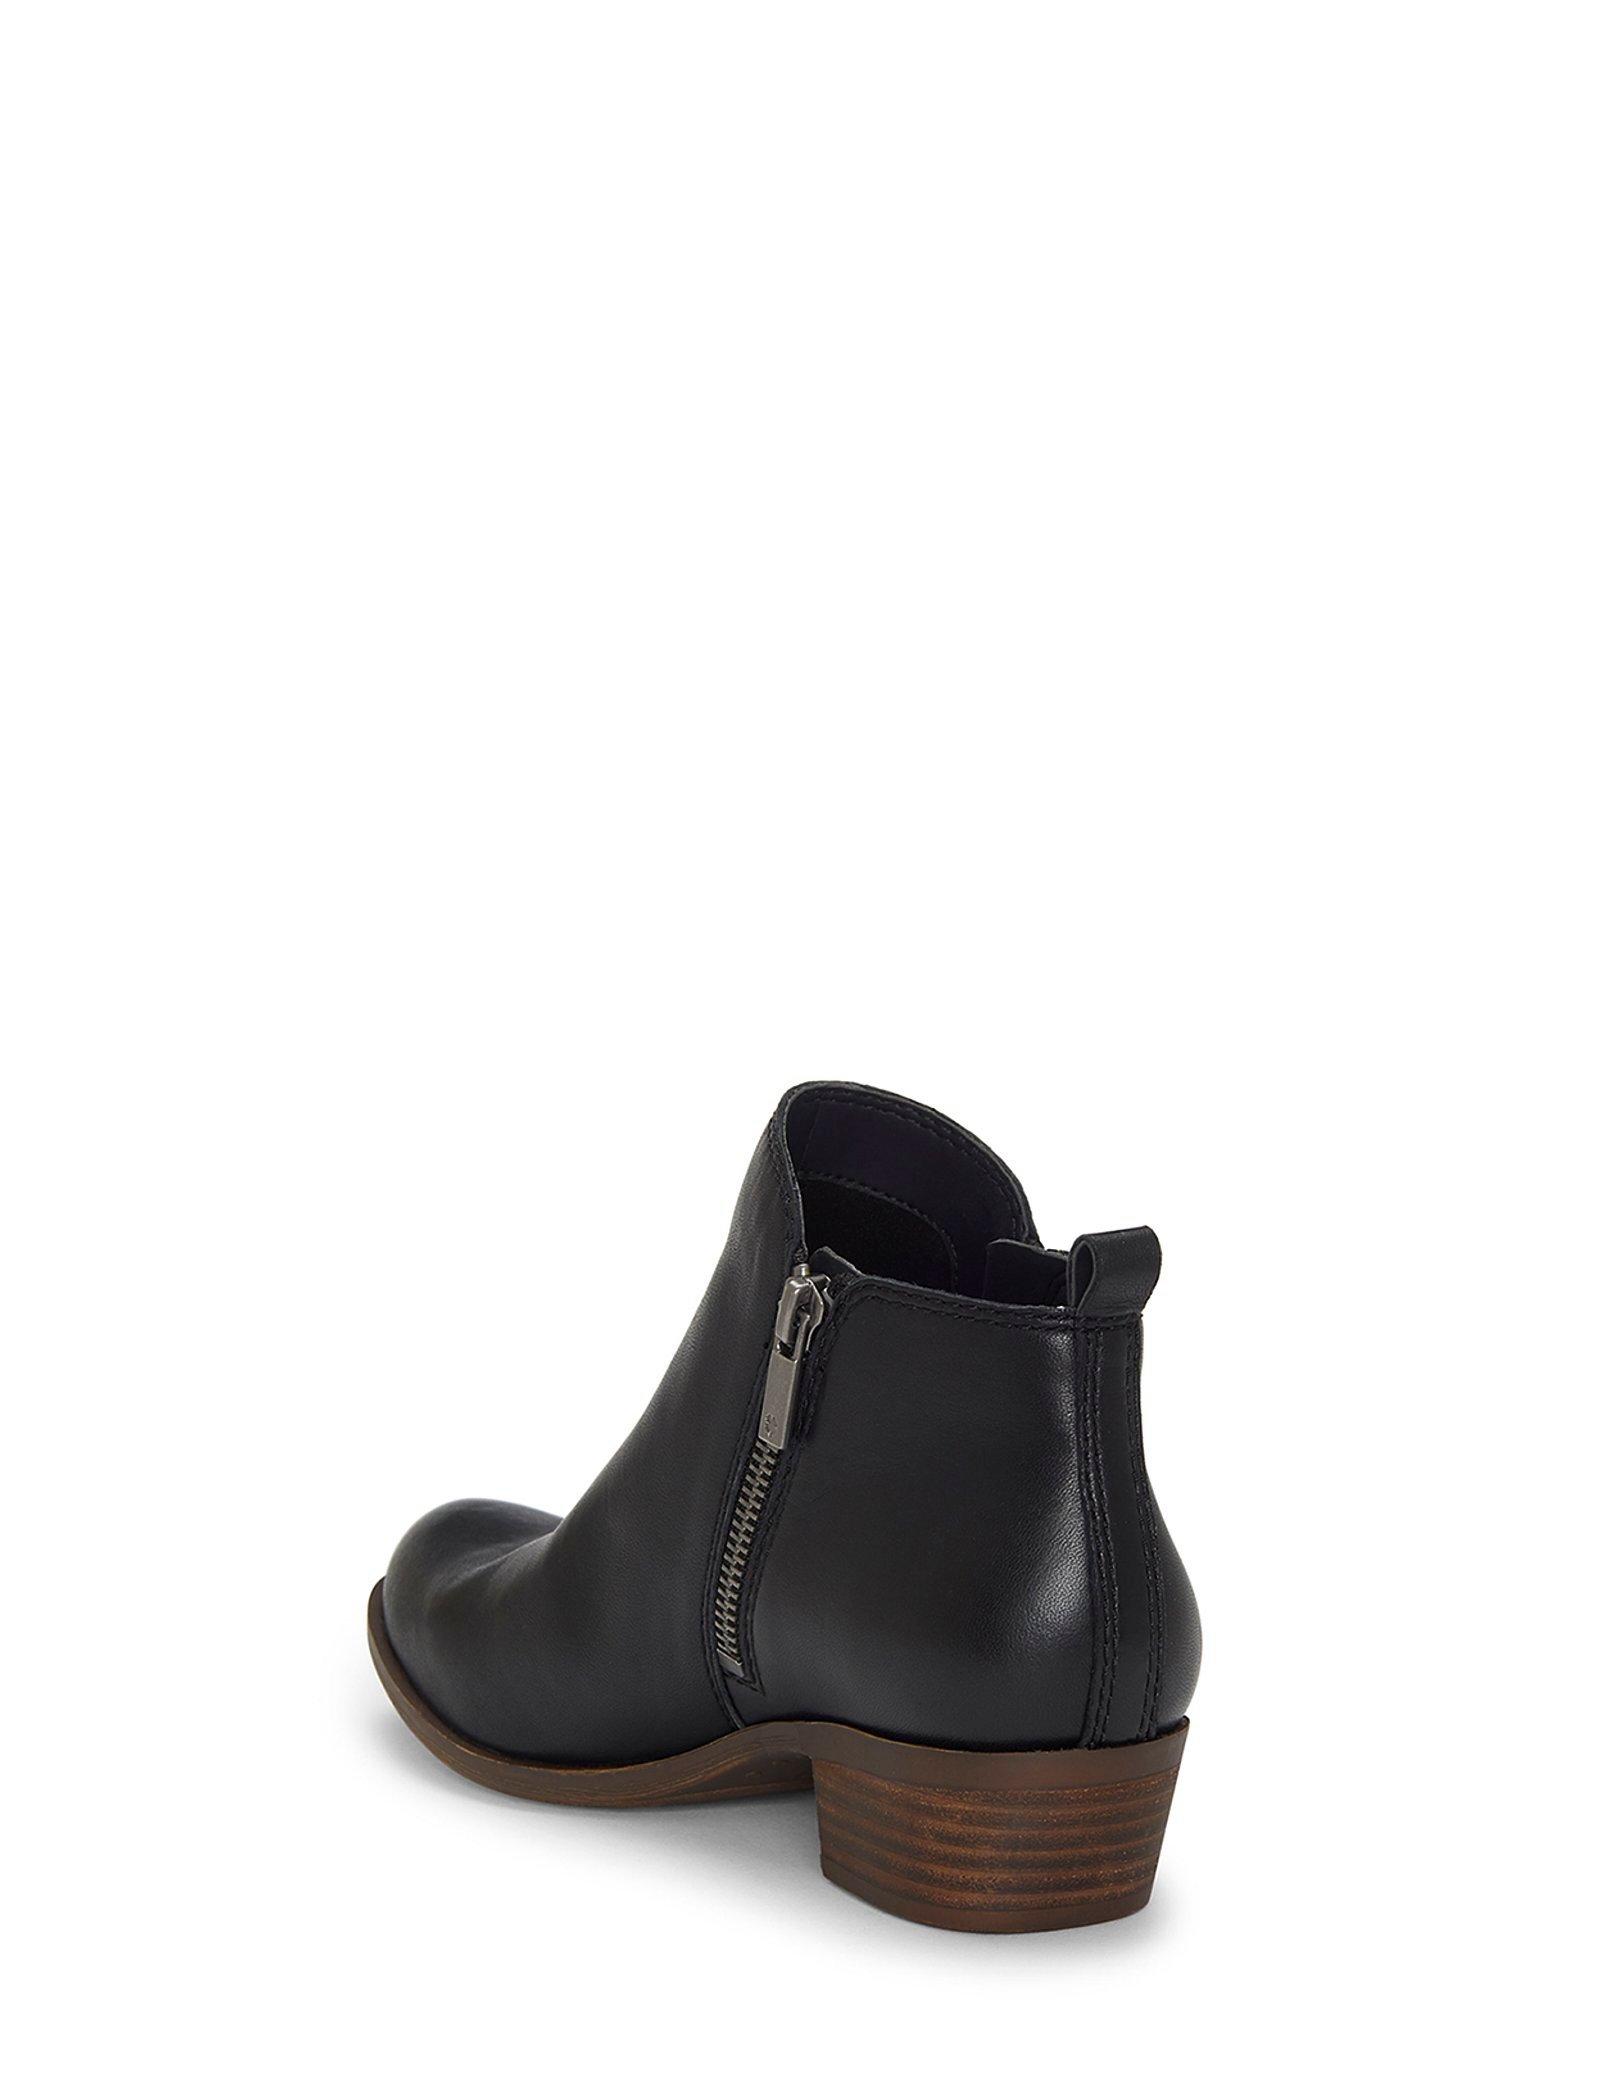 BASEL LEATHER FLAT BOOTIE, image 5